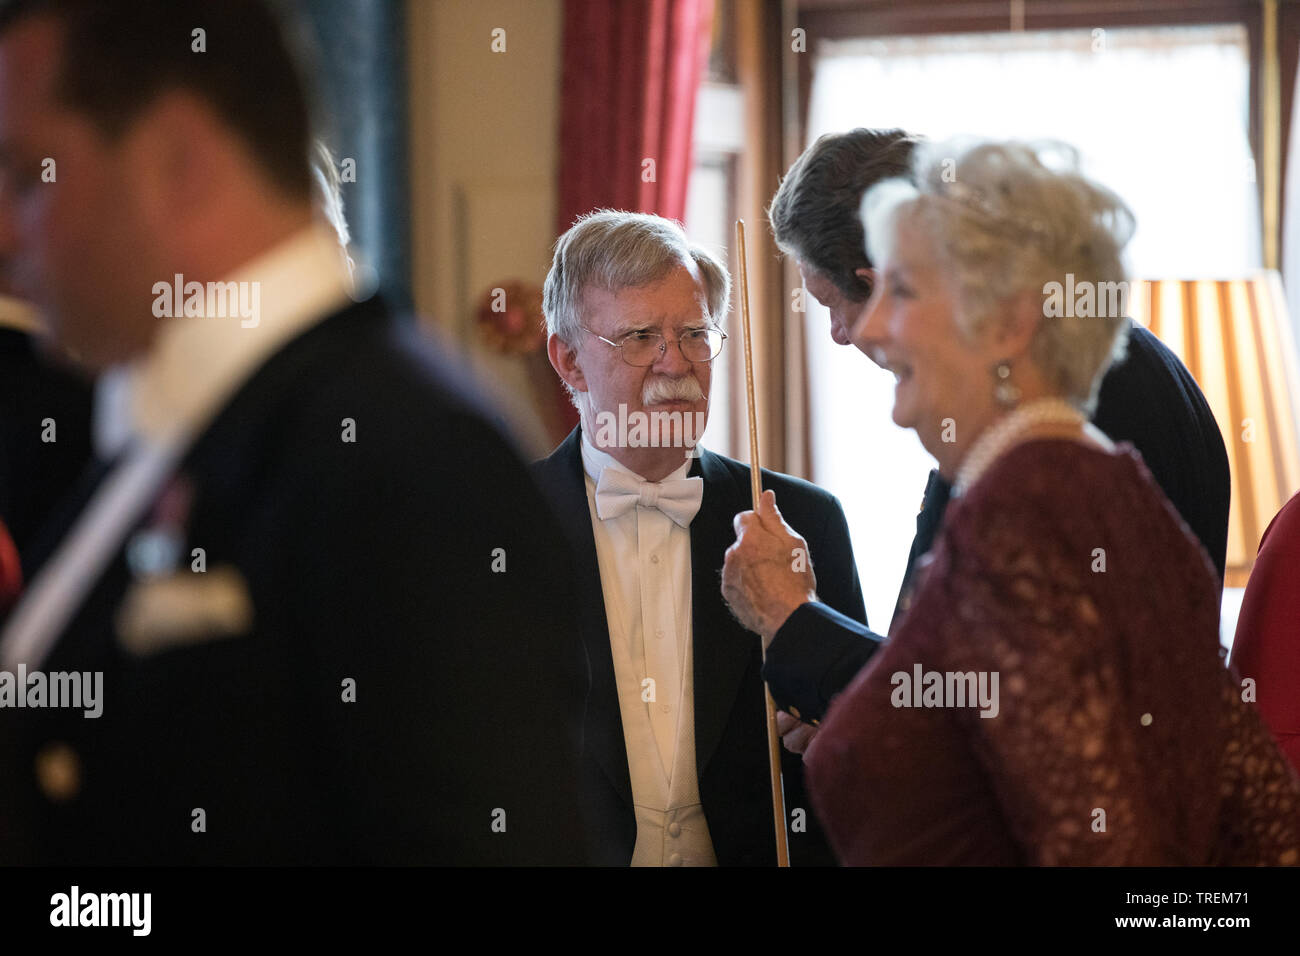 John R. Bolton former National Security Advisor of the United States at the State Banquet, Buckingham Palace, London, UK Stock Photo